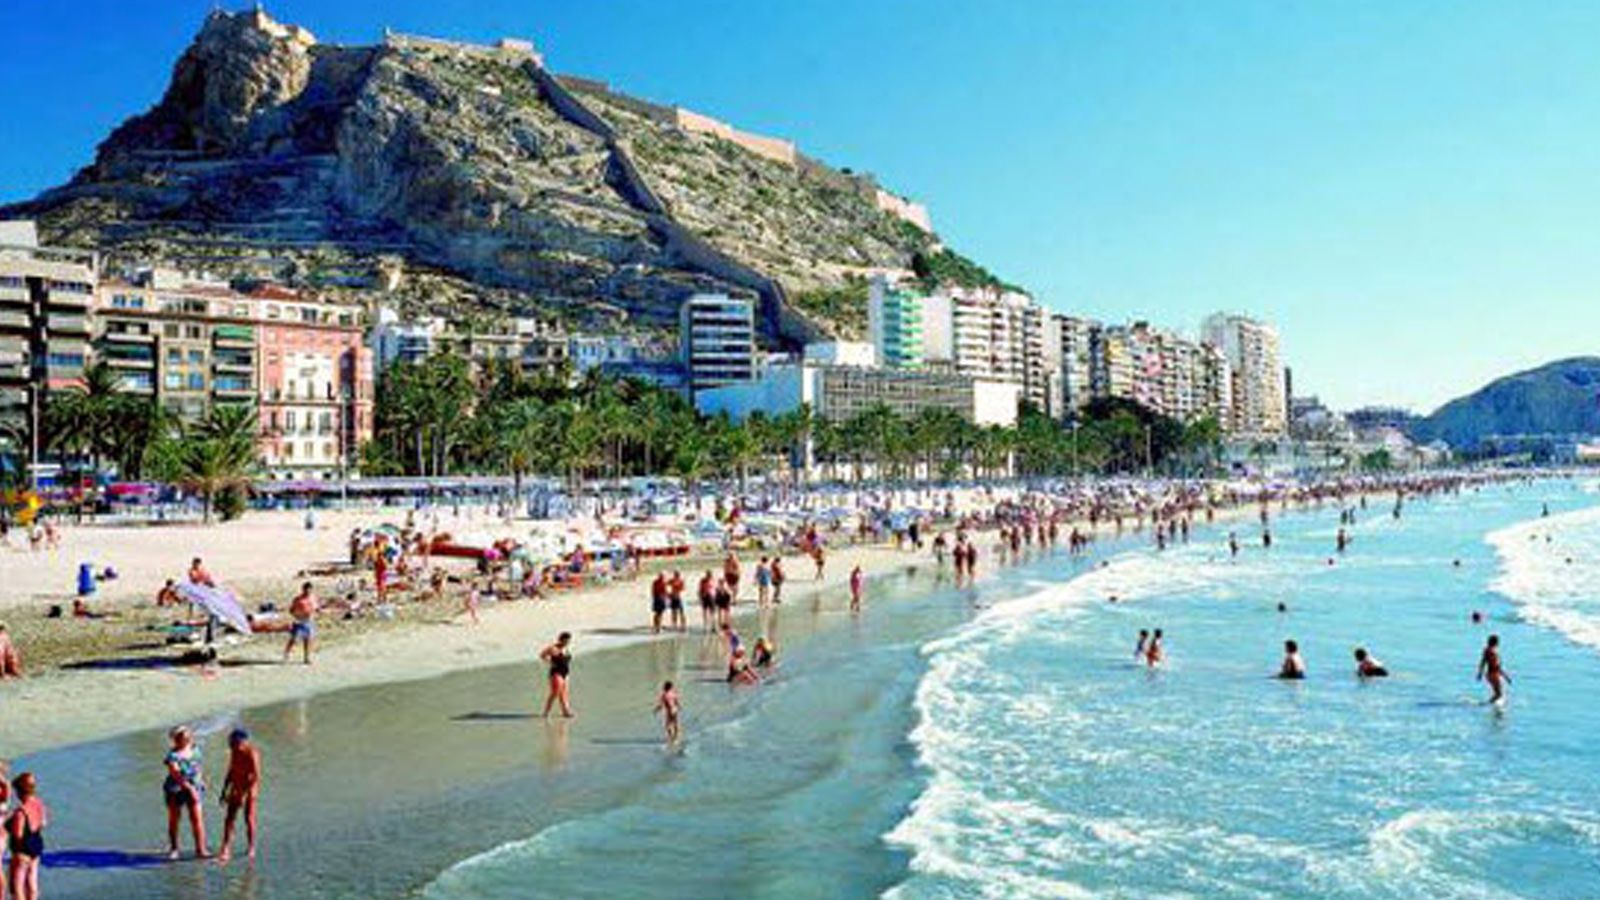 Alicante Spain Pictures Wallpapers